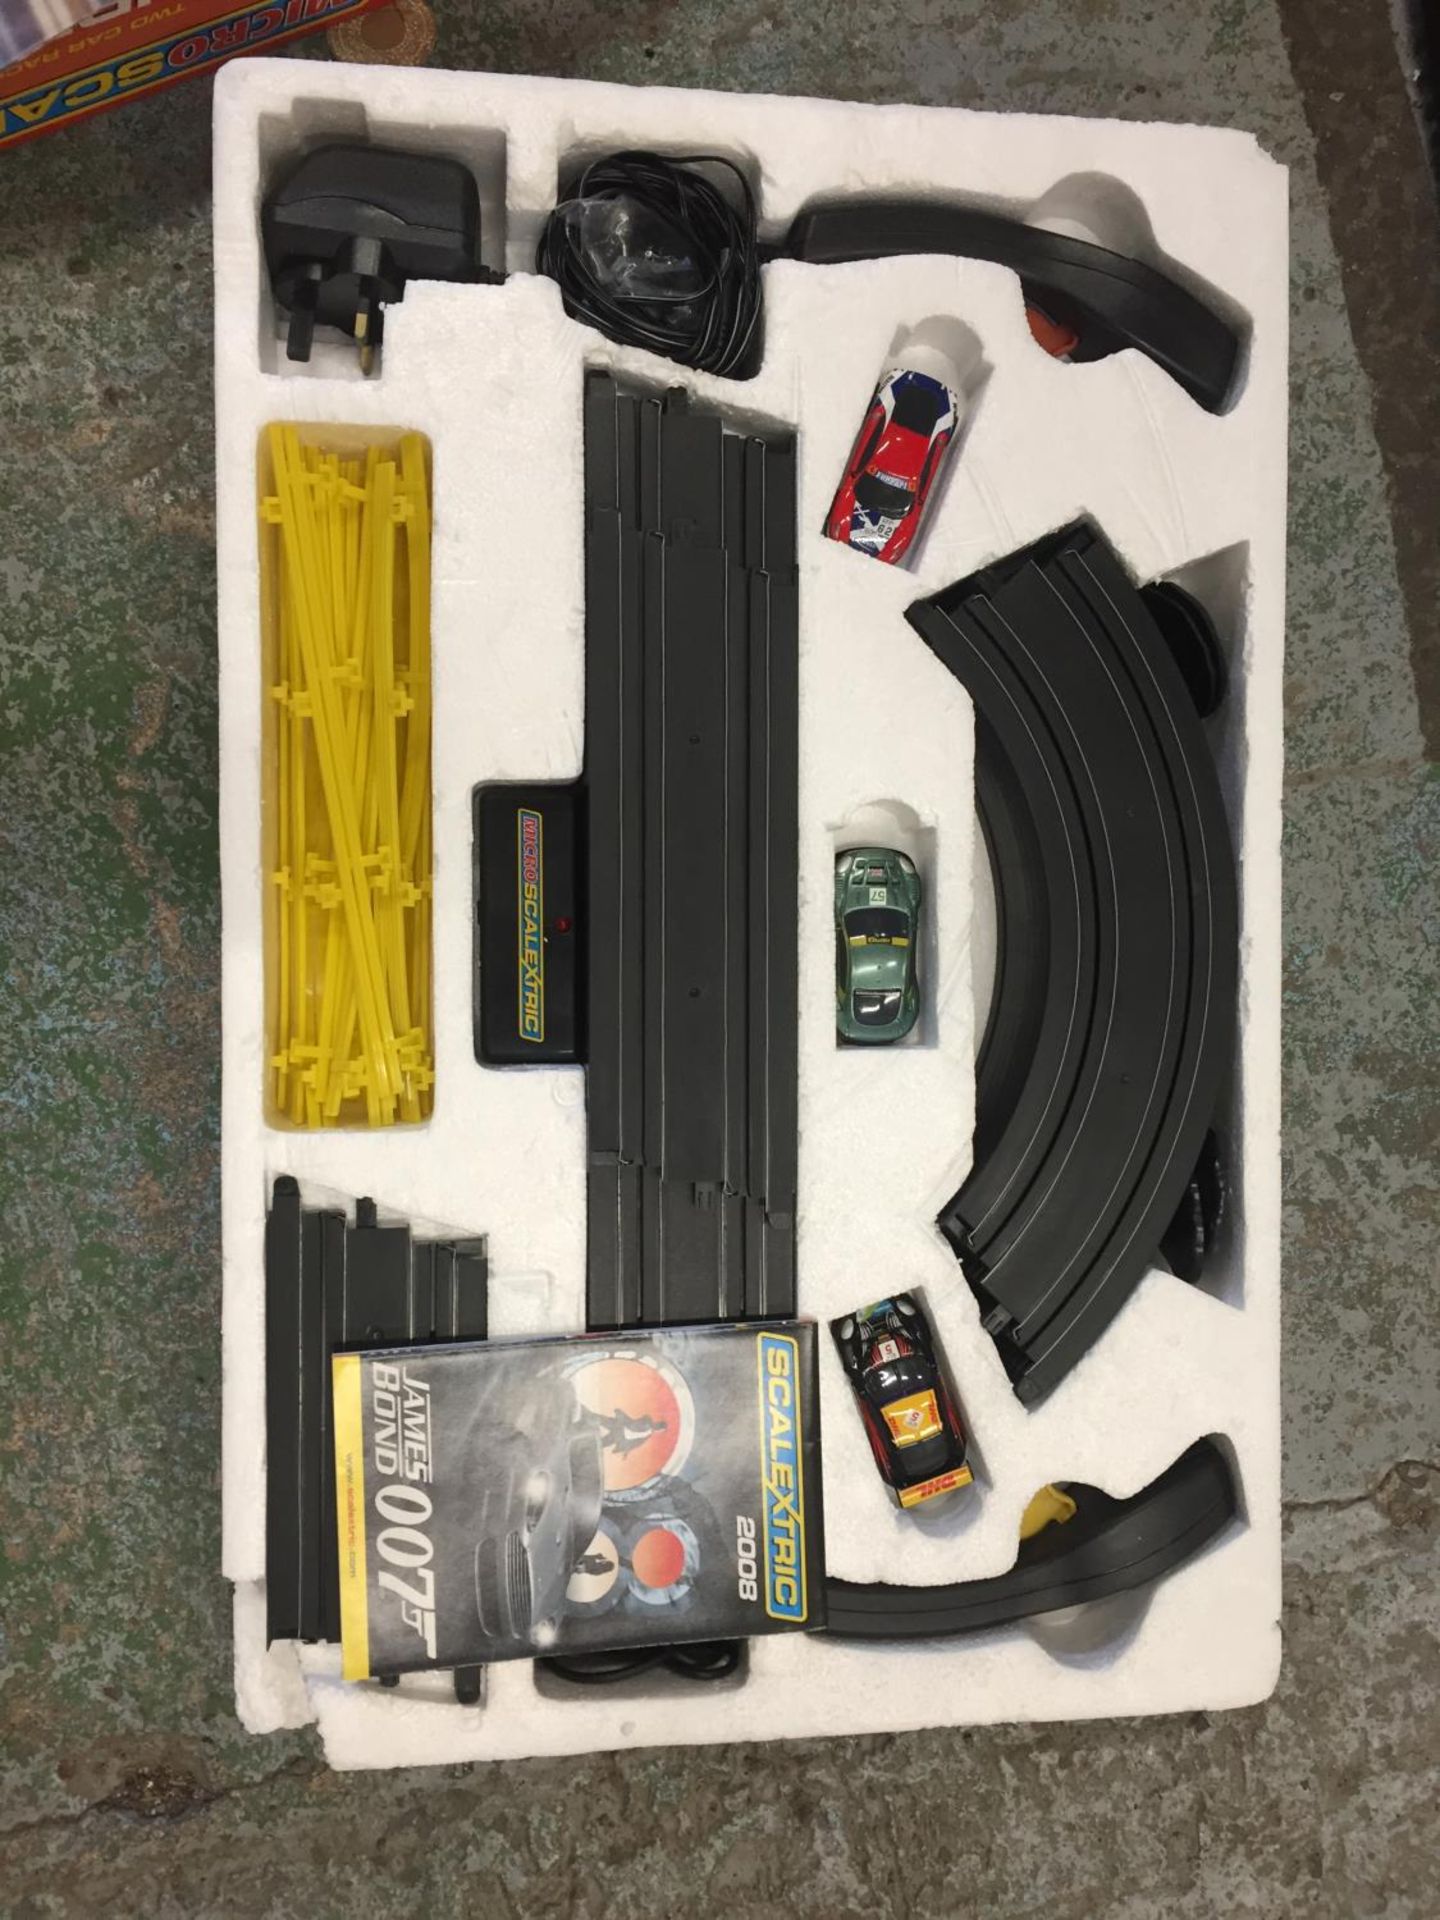 A MICRO SCALEXTRIC RACING SET IN BOX - Image 2 of 5